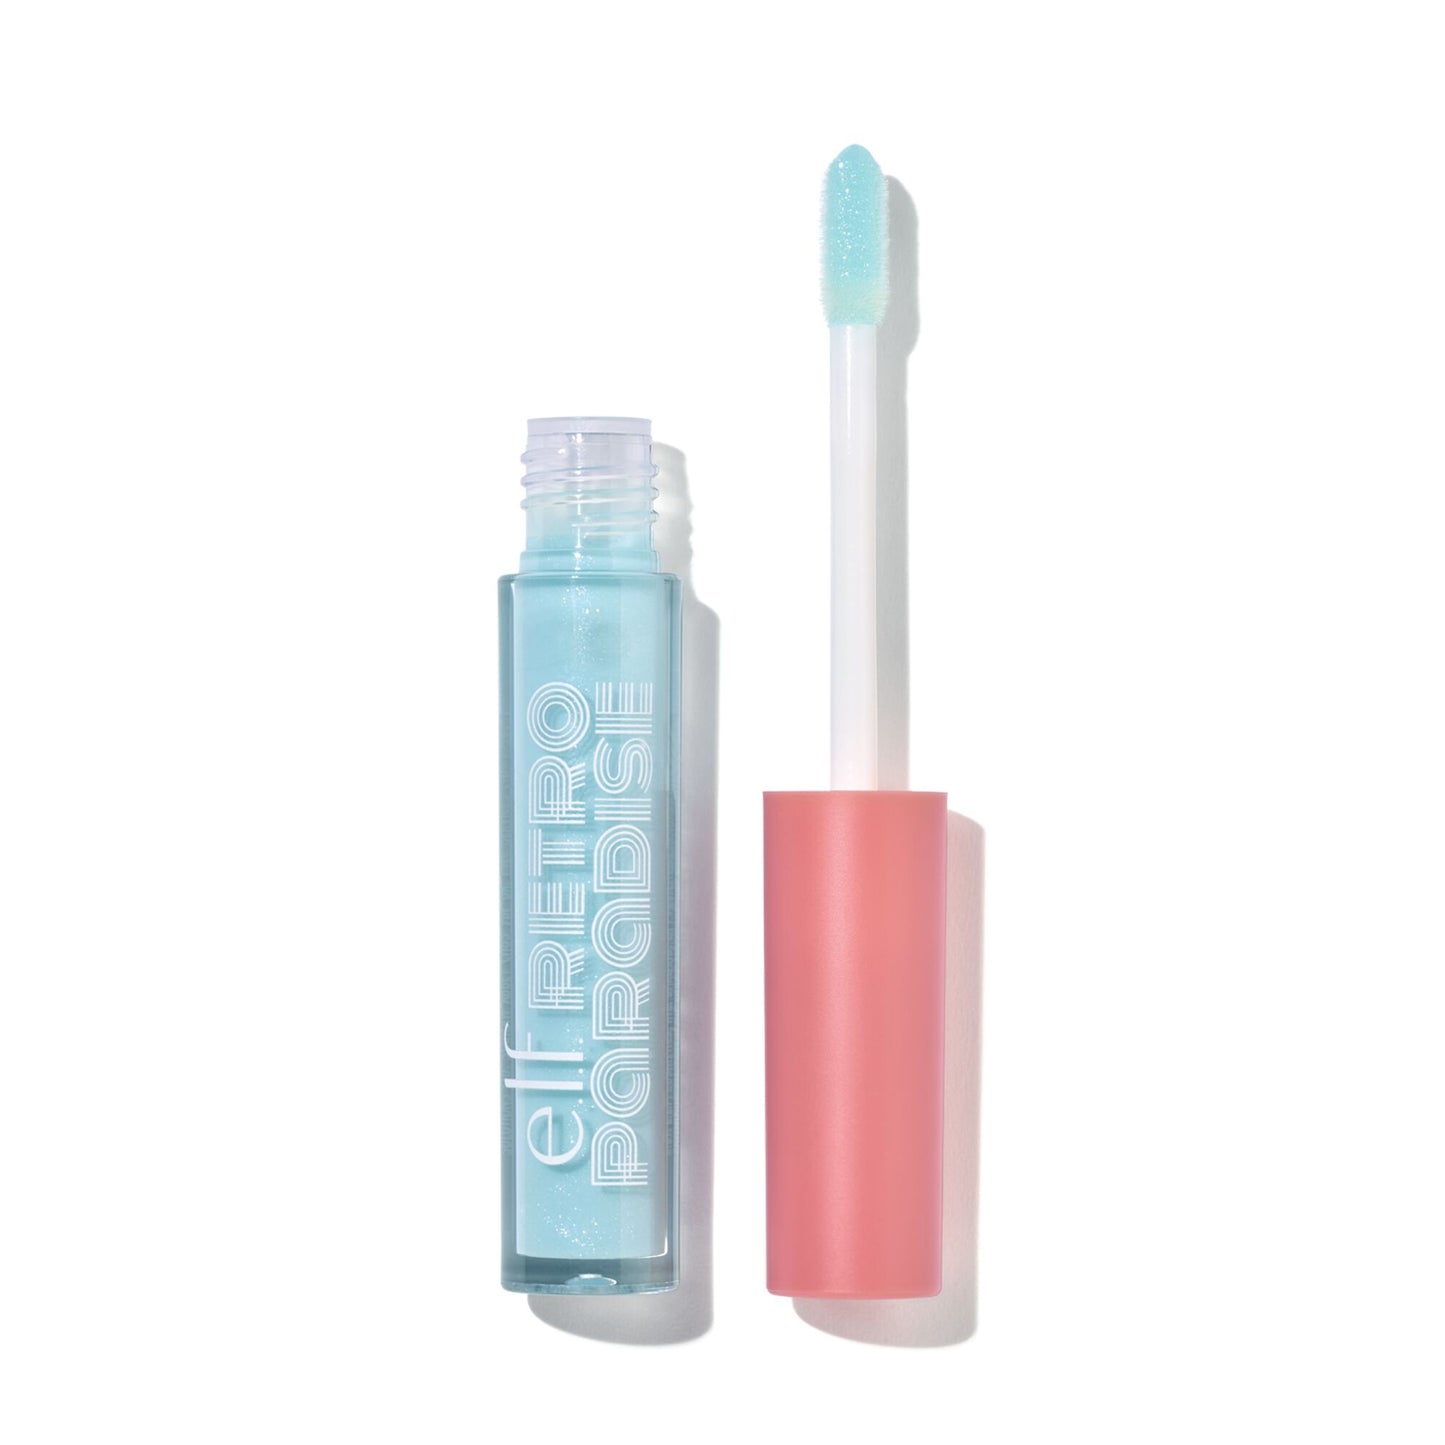 E.L.F Dream On Lip Gloss - Electric Lemonade 2.5ml This Nourishing, creamy lip gloss with sheer, iridescent shimmer – basically, what lip gloss dreams are made of. This lip gloss gives your lips a kiss of color with an irresistible tropical scent.  Electric Lemonade - Appears pastel blue, but applies clear with multicolor iridescent shimmer.